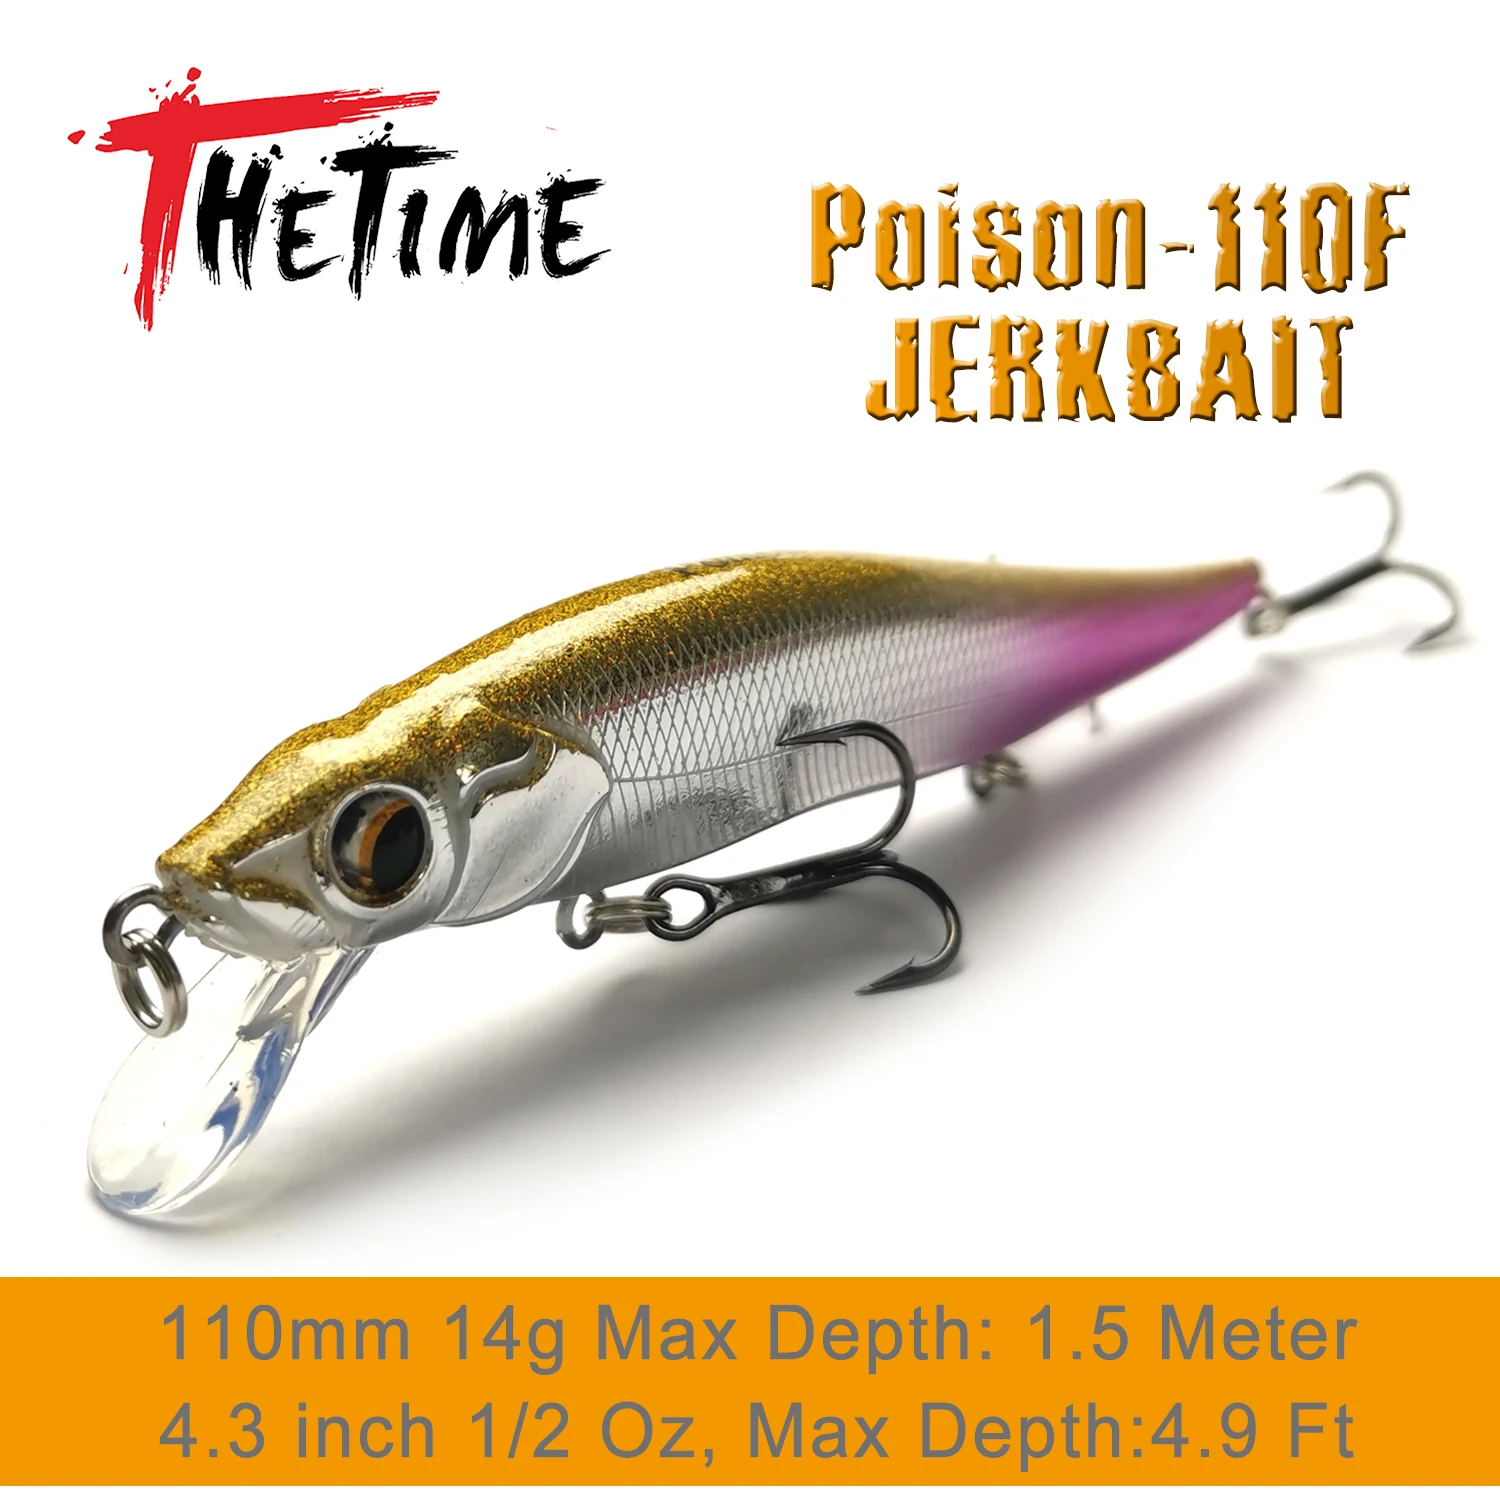 THETIME 110mm/14g Vision 110 SP Floating Fishing Lures Jerkbait Minnow Tungsten Weight System Wobbler Bait Bass Pike Fishing